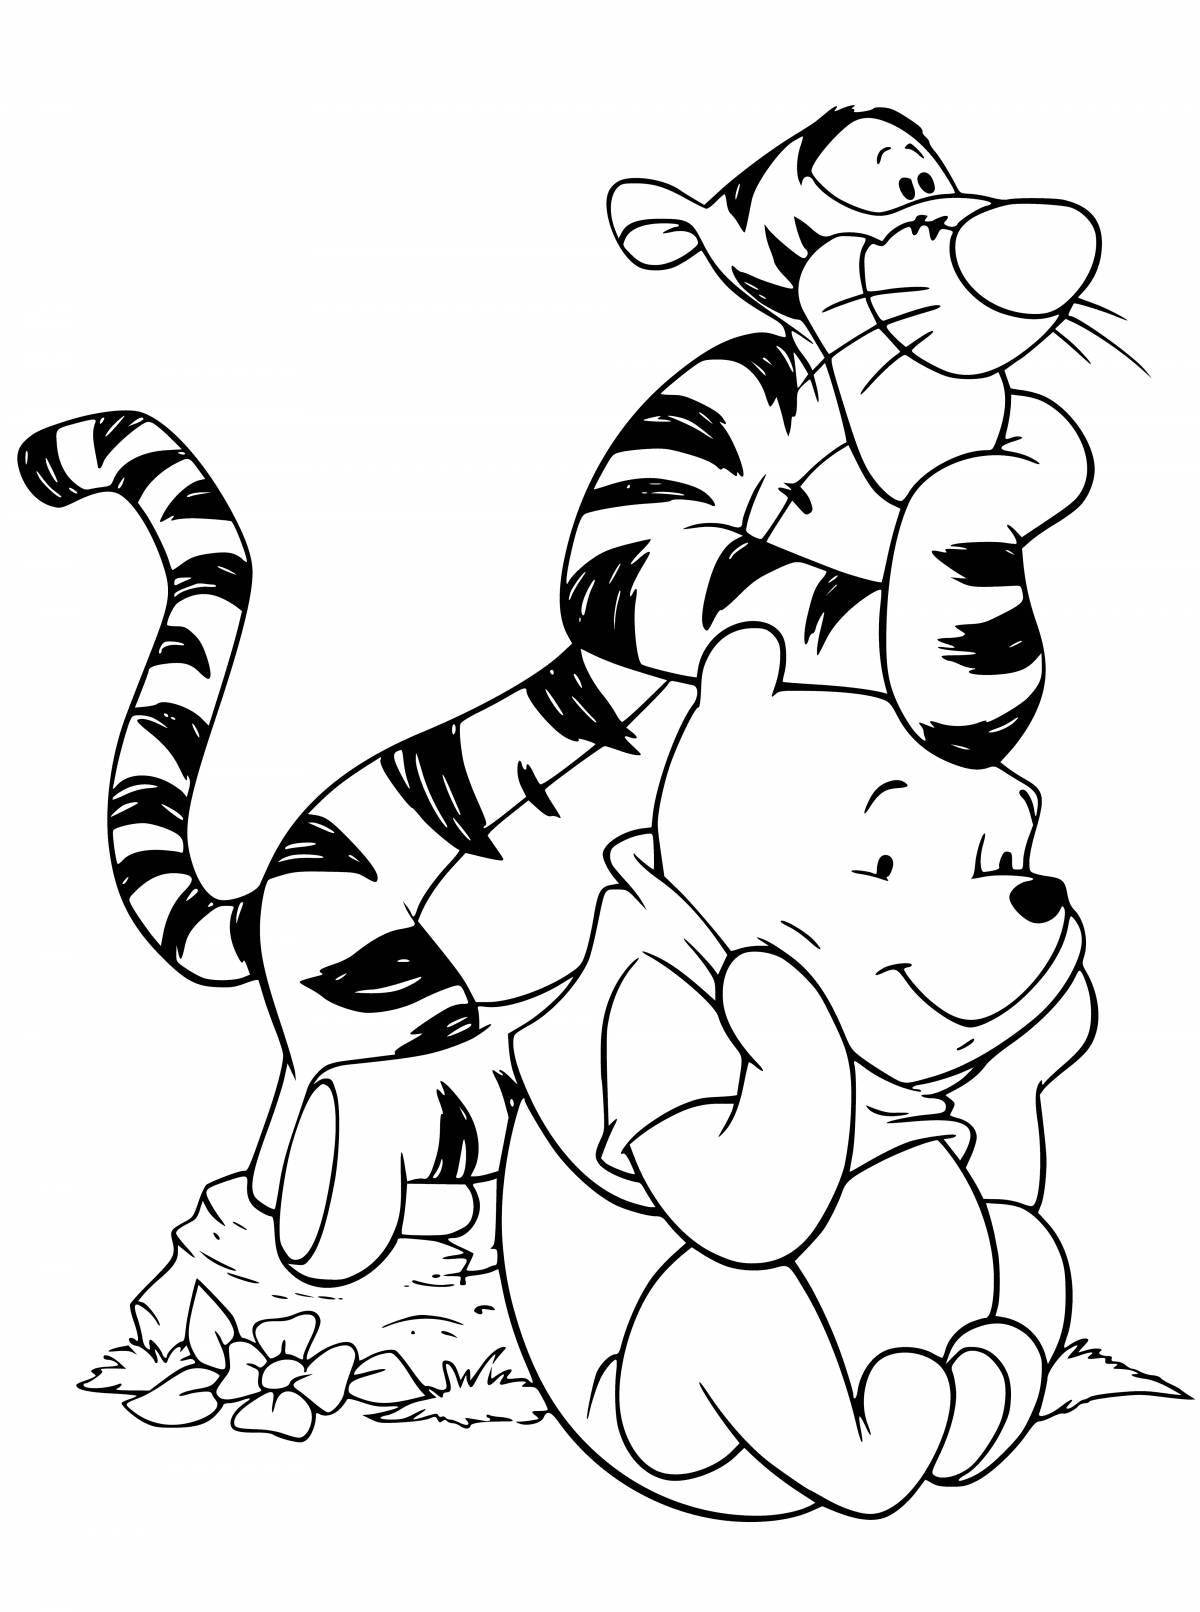 Creative coloring pages coloring pages